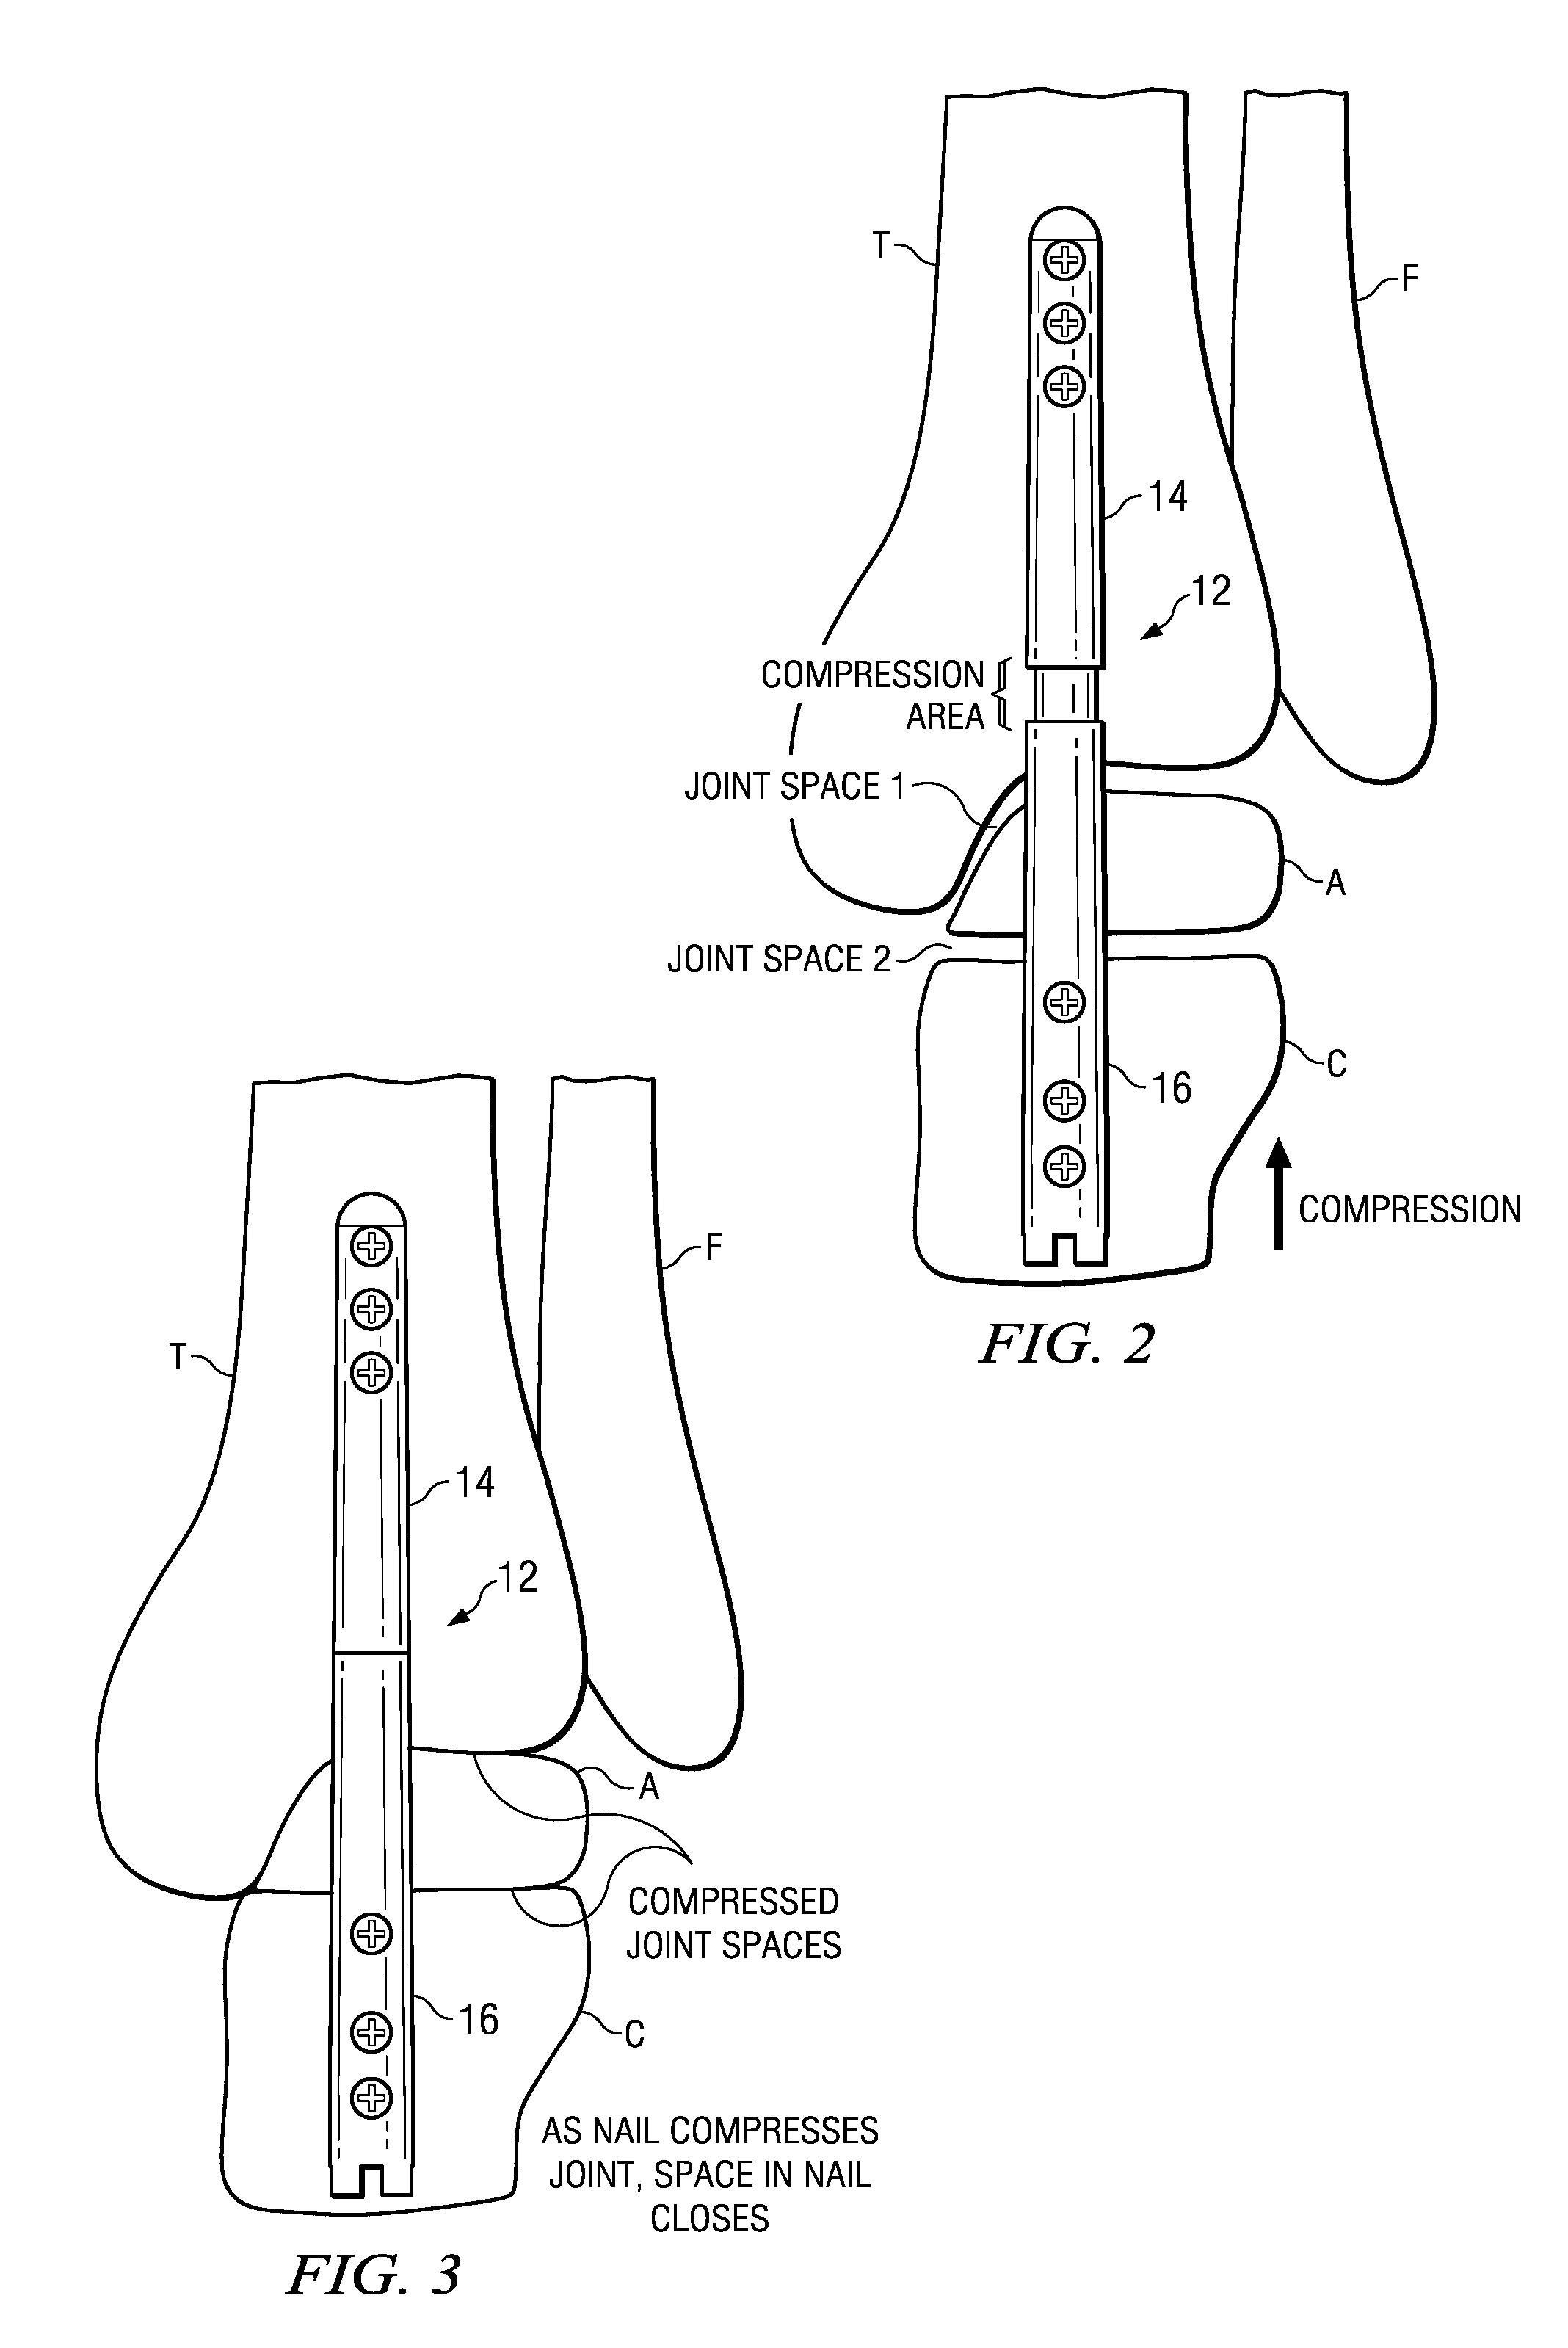 Ankle arthrodesis nail and outrigger assembly